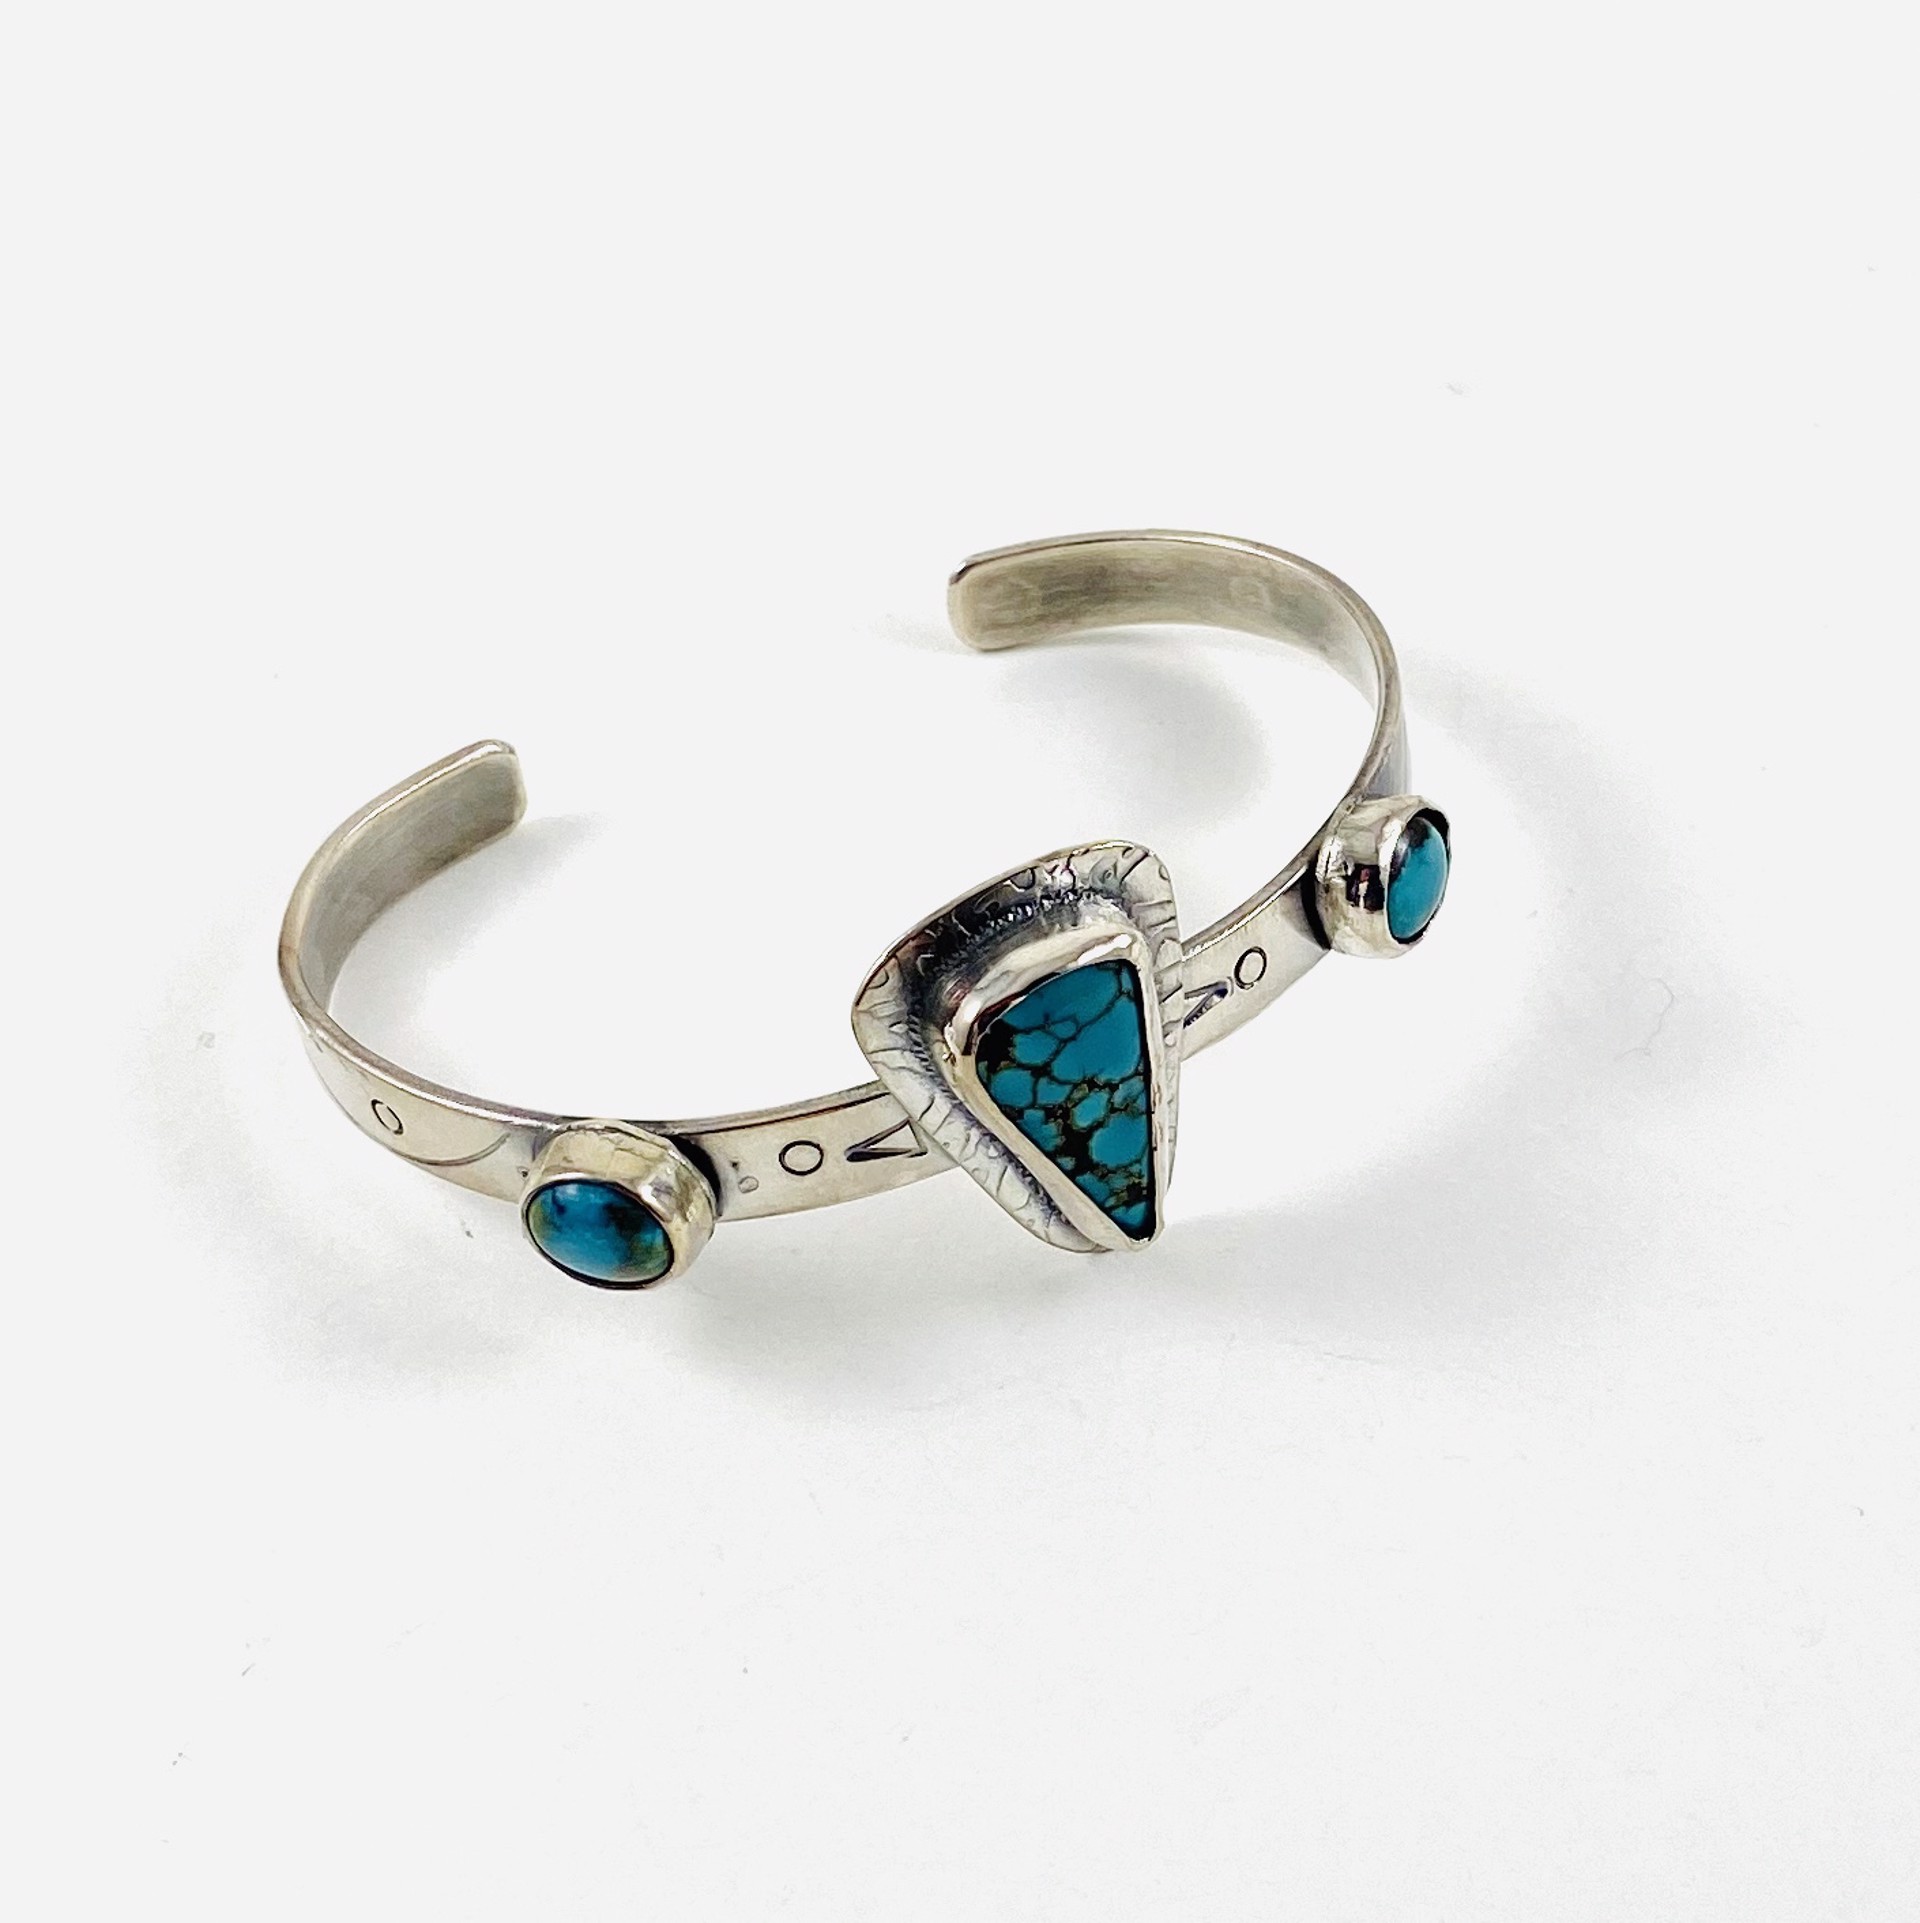 AB20-23 Turquoise Cuff Bracelet by Anne Bivens